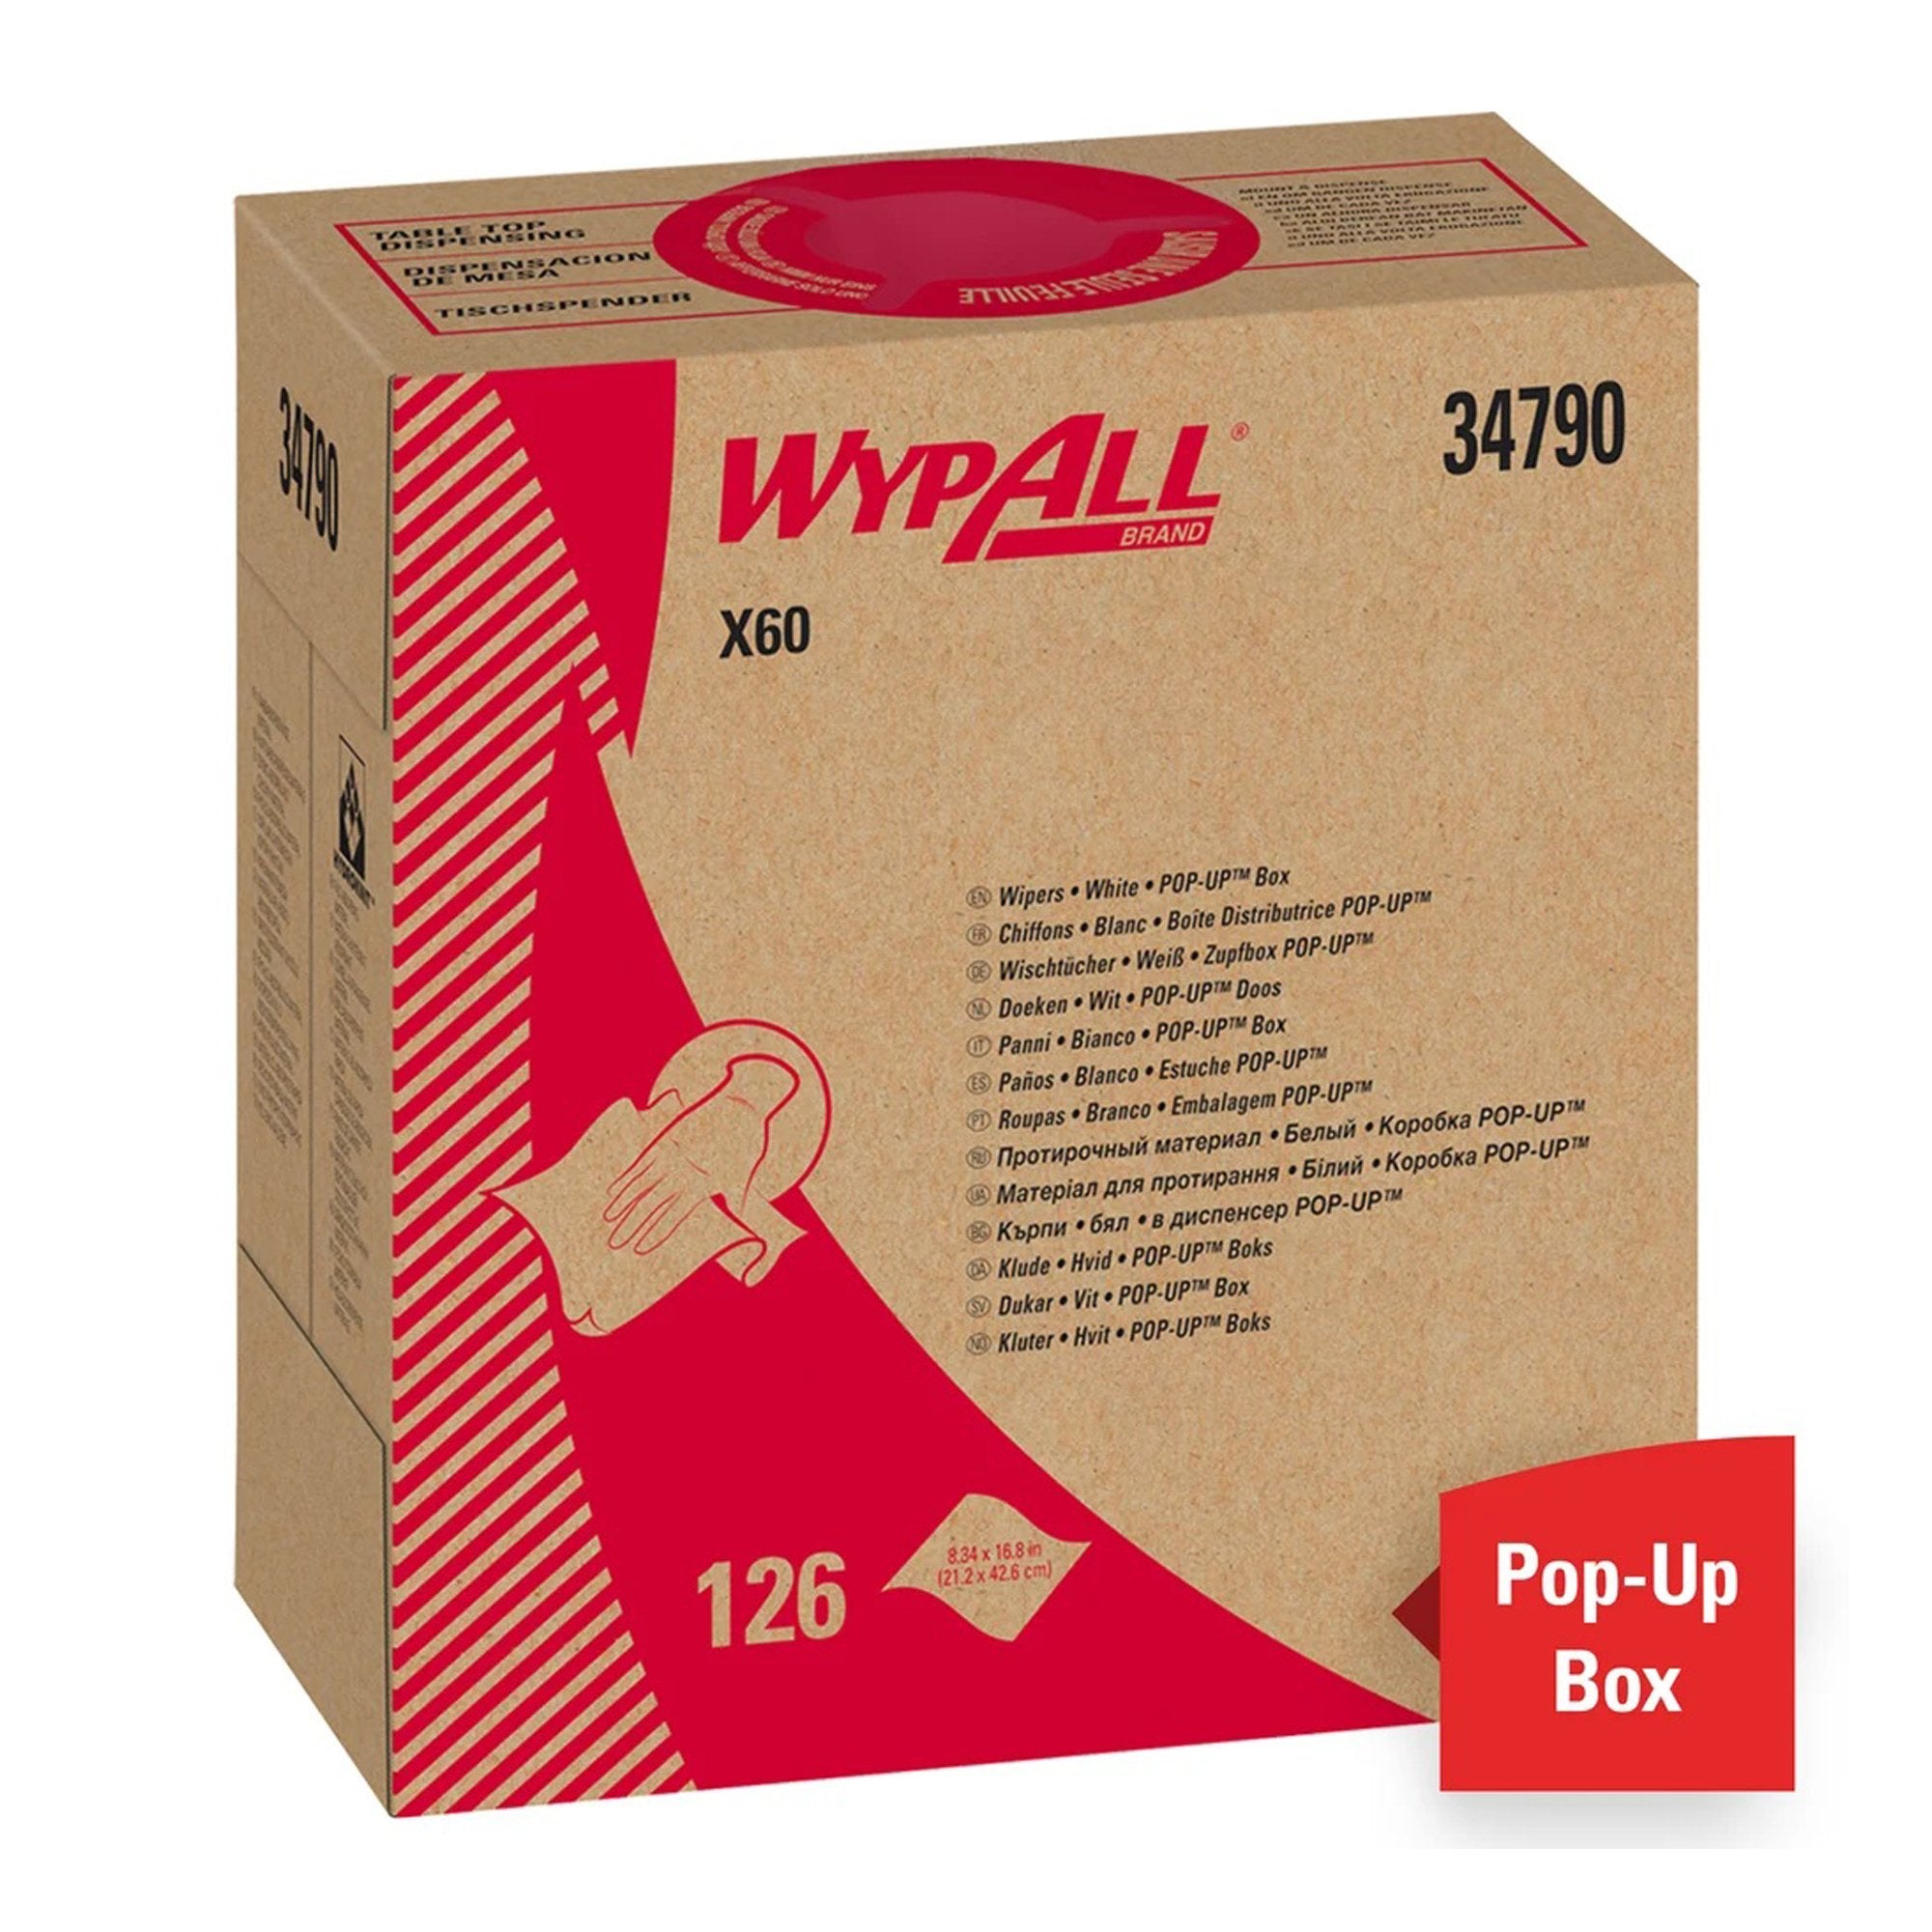 Task Wipe WypAll® X60 Light Duty White NonSterile Cellulose / Polypropylene 9-1/10 X 16-4/5 Inch Reusable